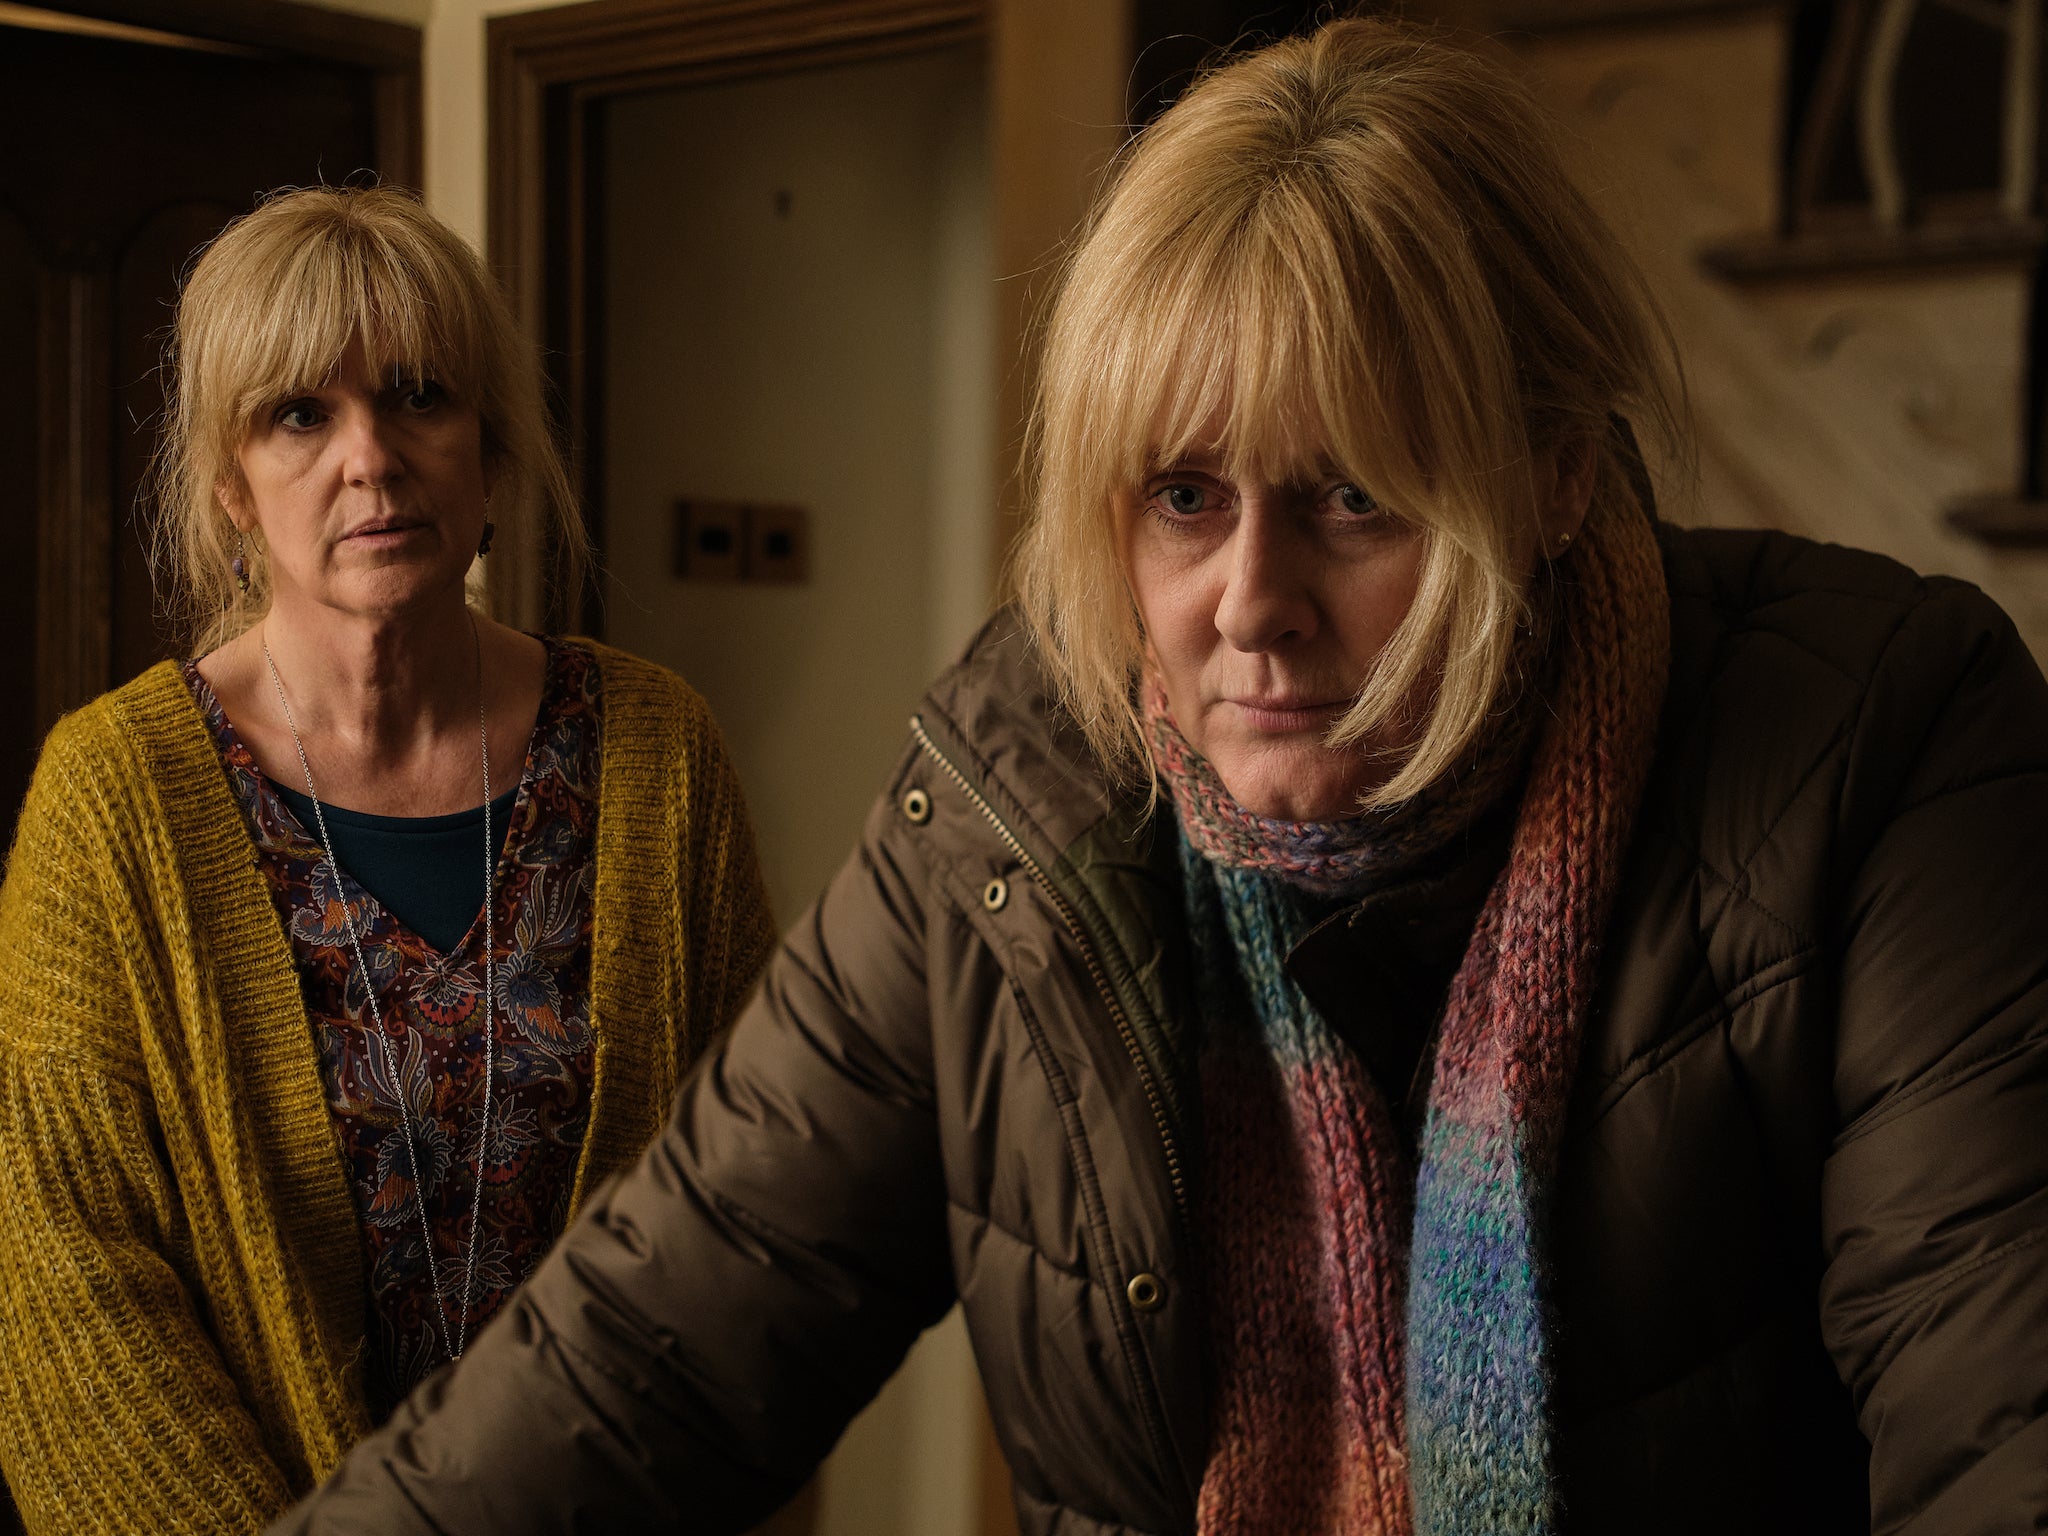 Siobhan Finneran and Sarah Lancashire in ‘Happy Valley’